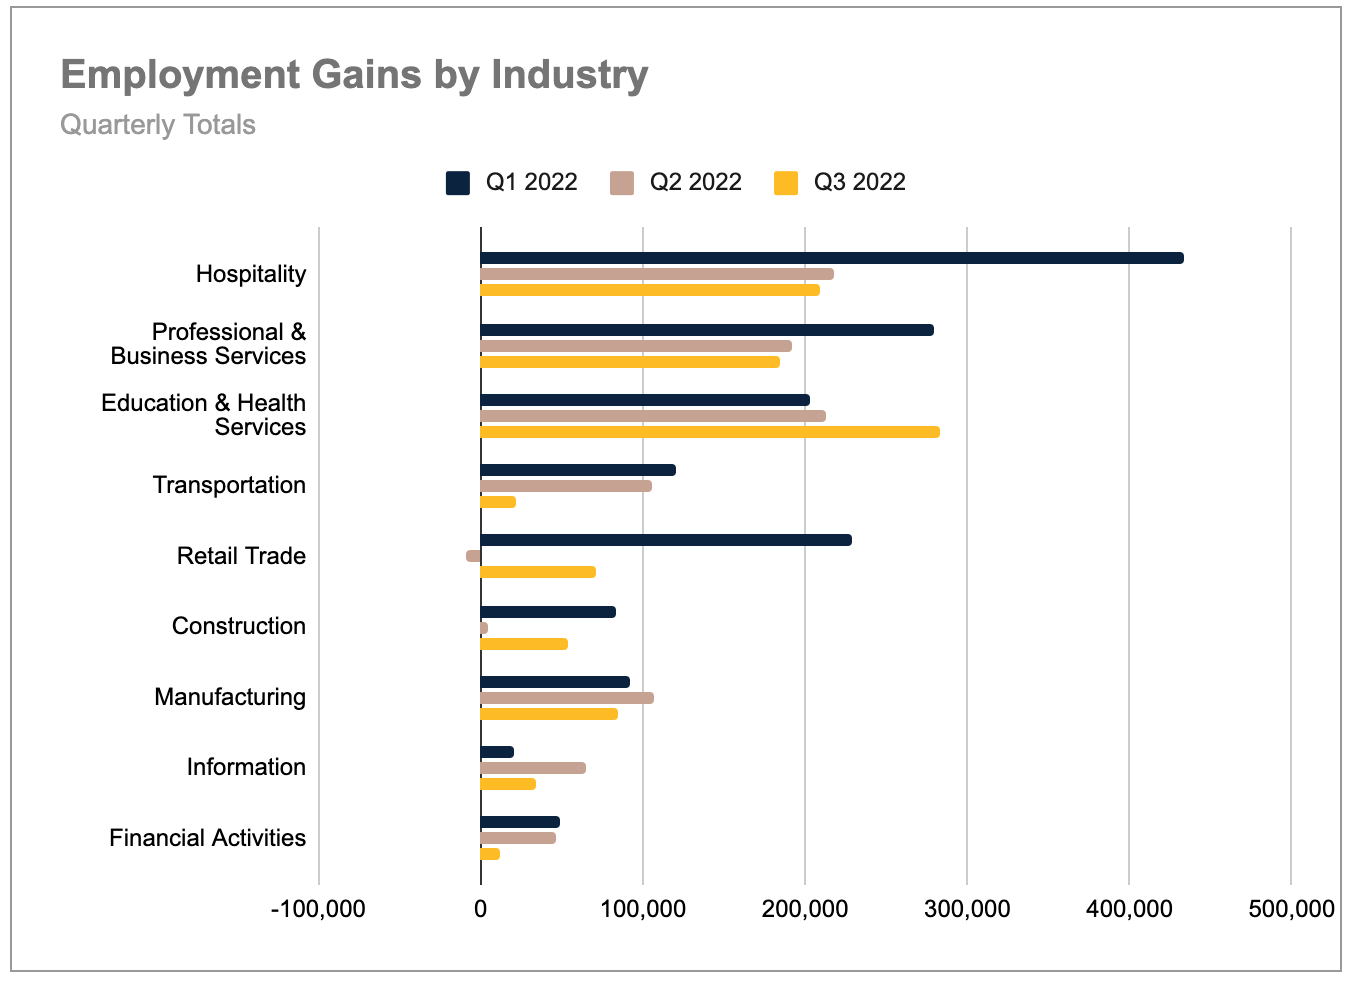 Employment gains by industry, quarterly totals